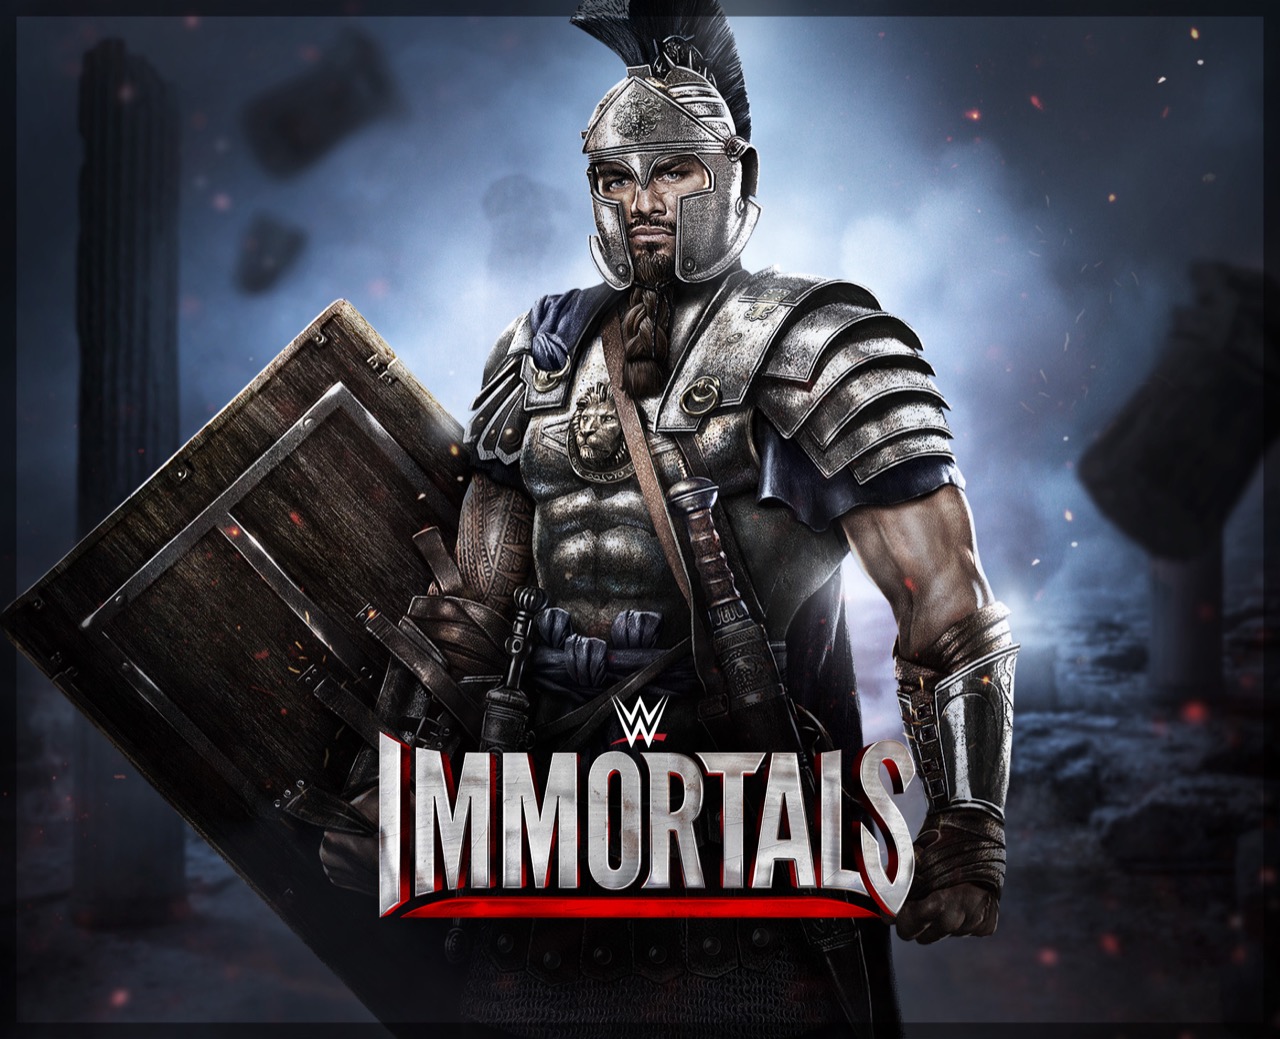 Pin Content Immortals Karapyss Wallpaper Jpg Into Your On